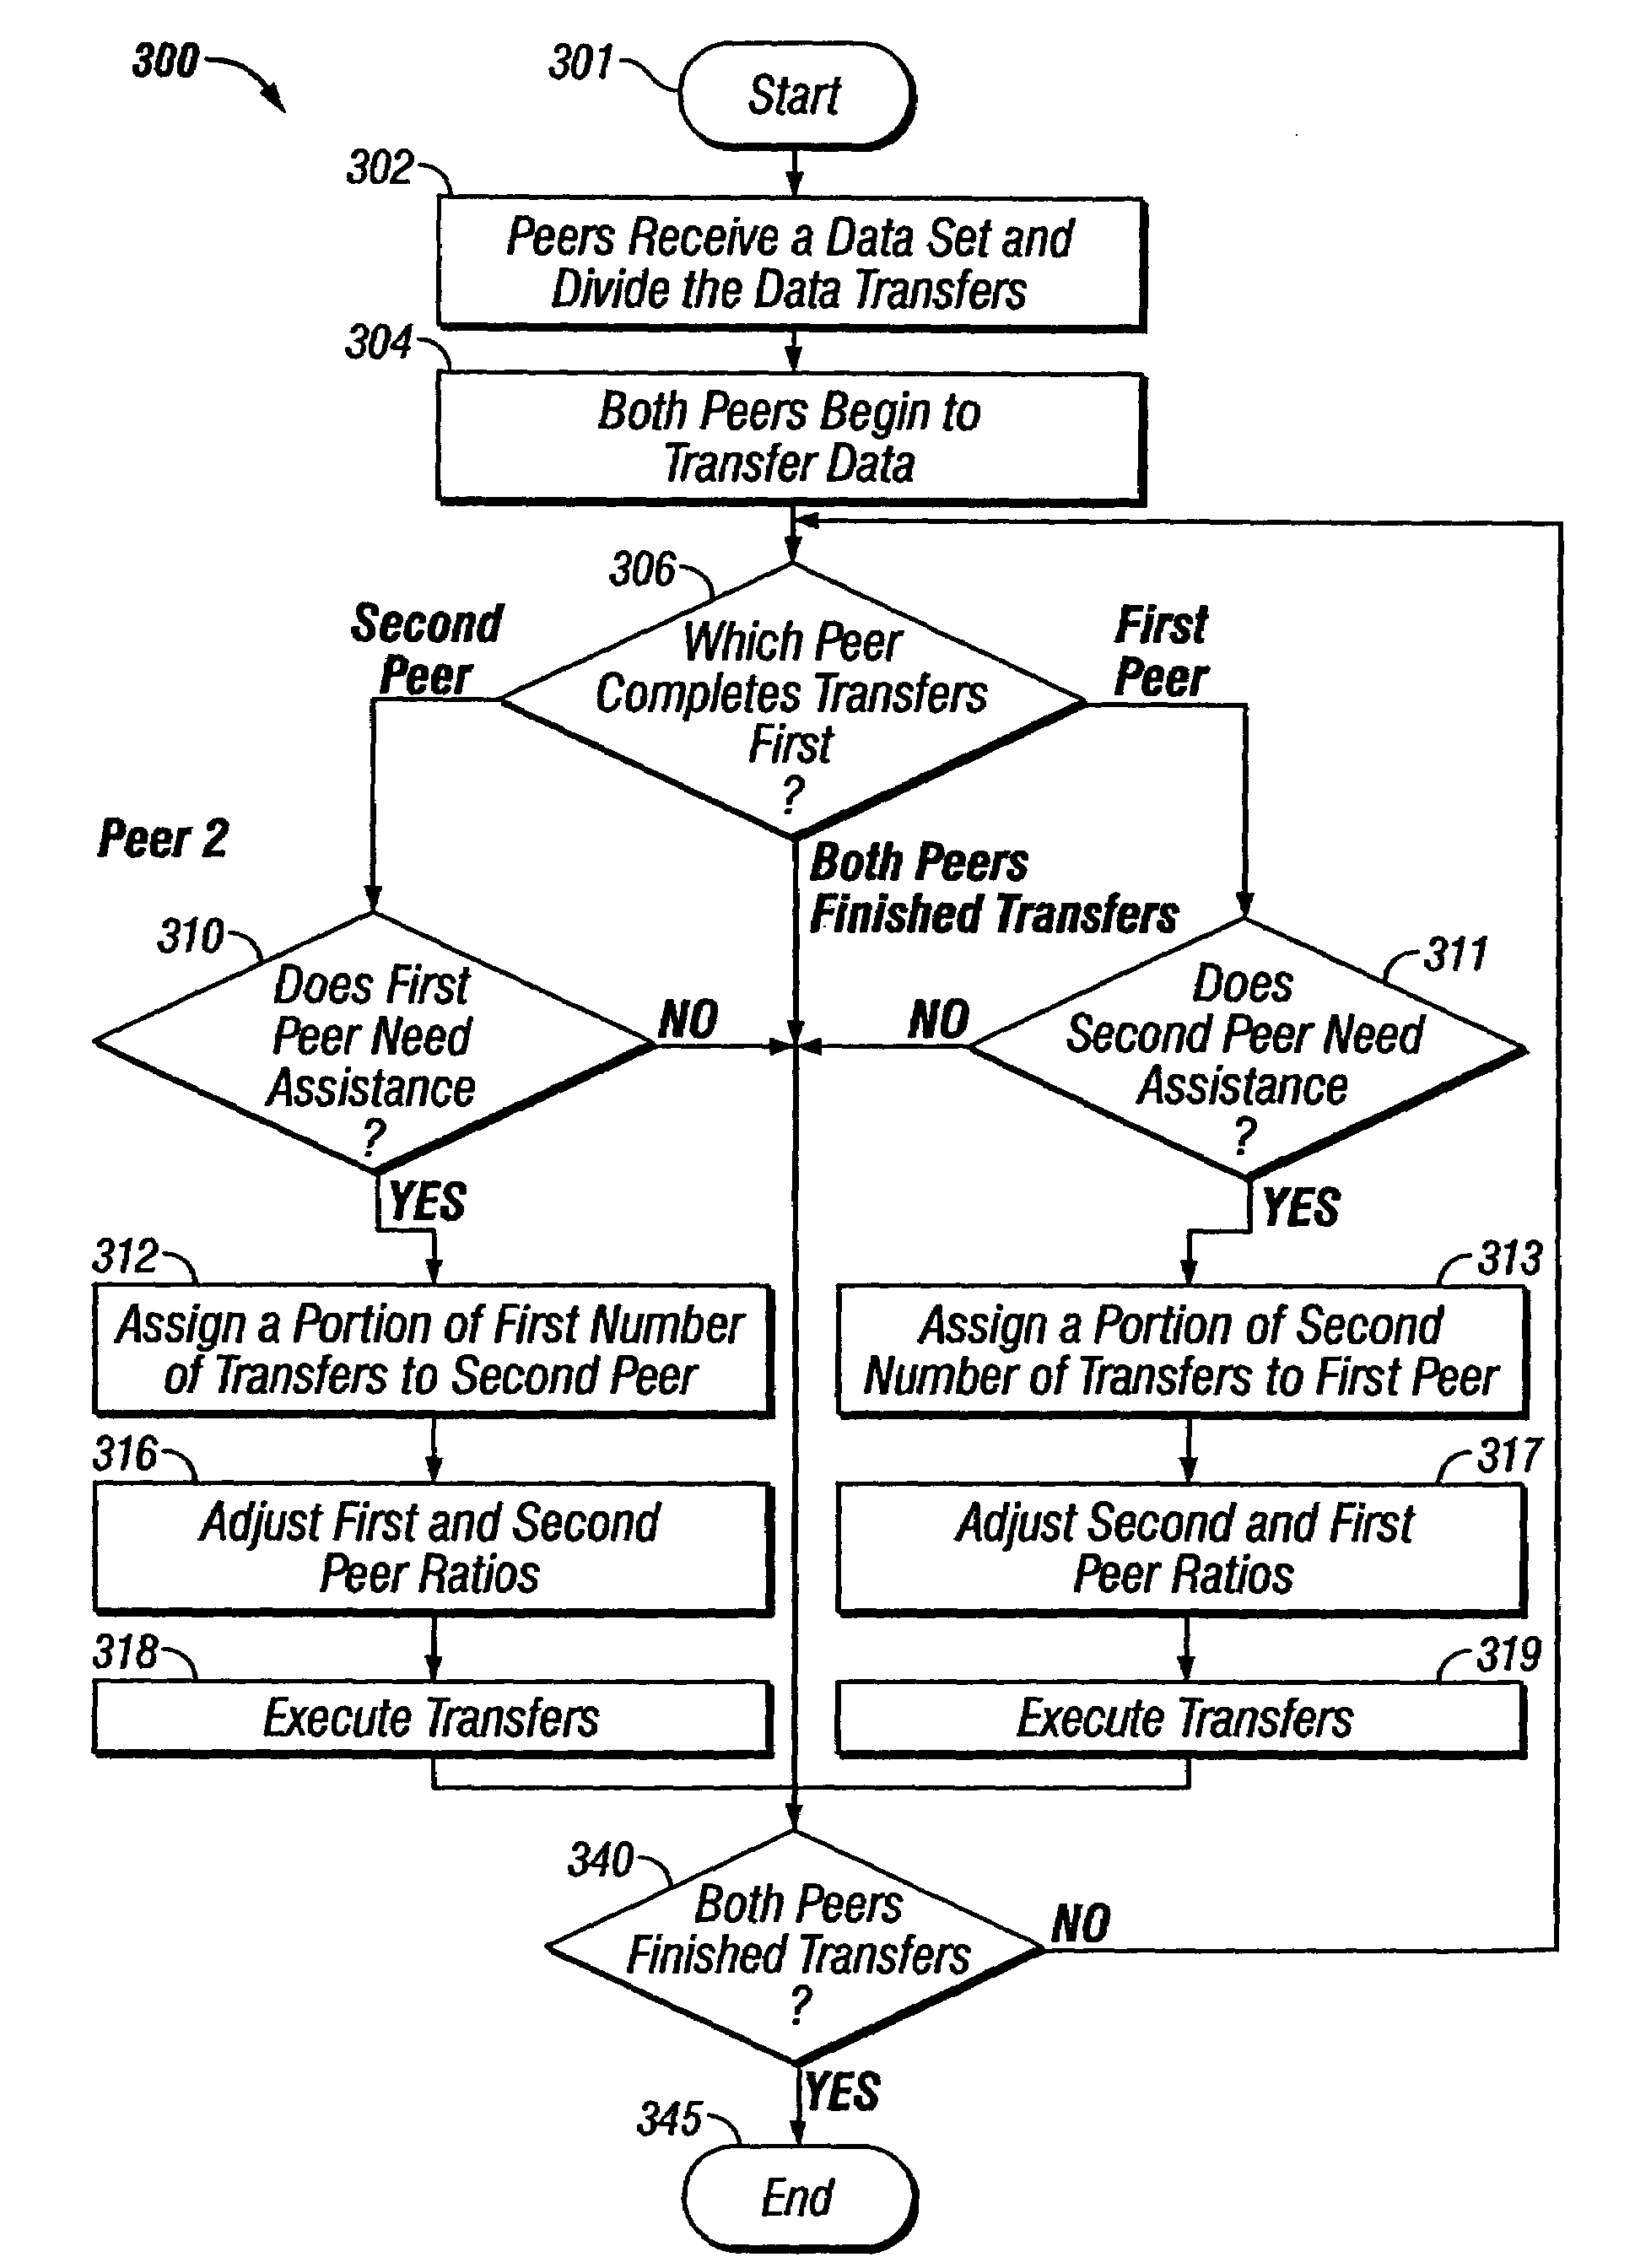 Autonomic learning method to load balance output transfers of two peer nodes